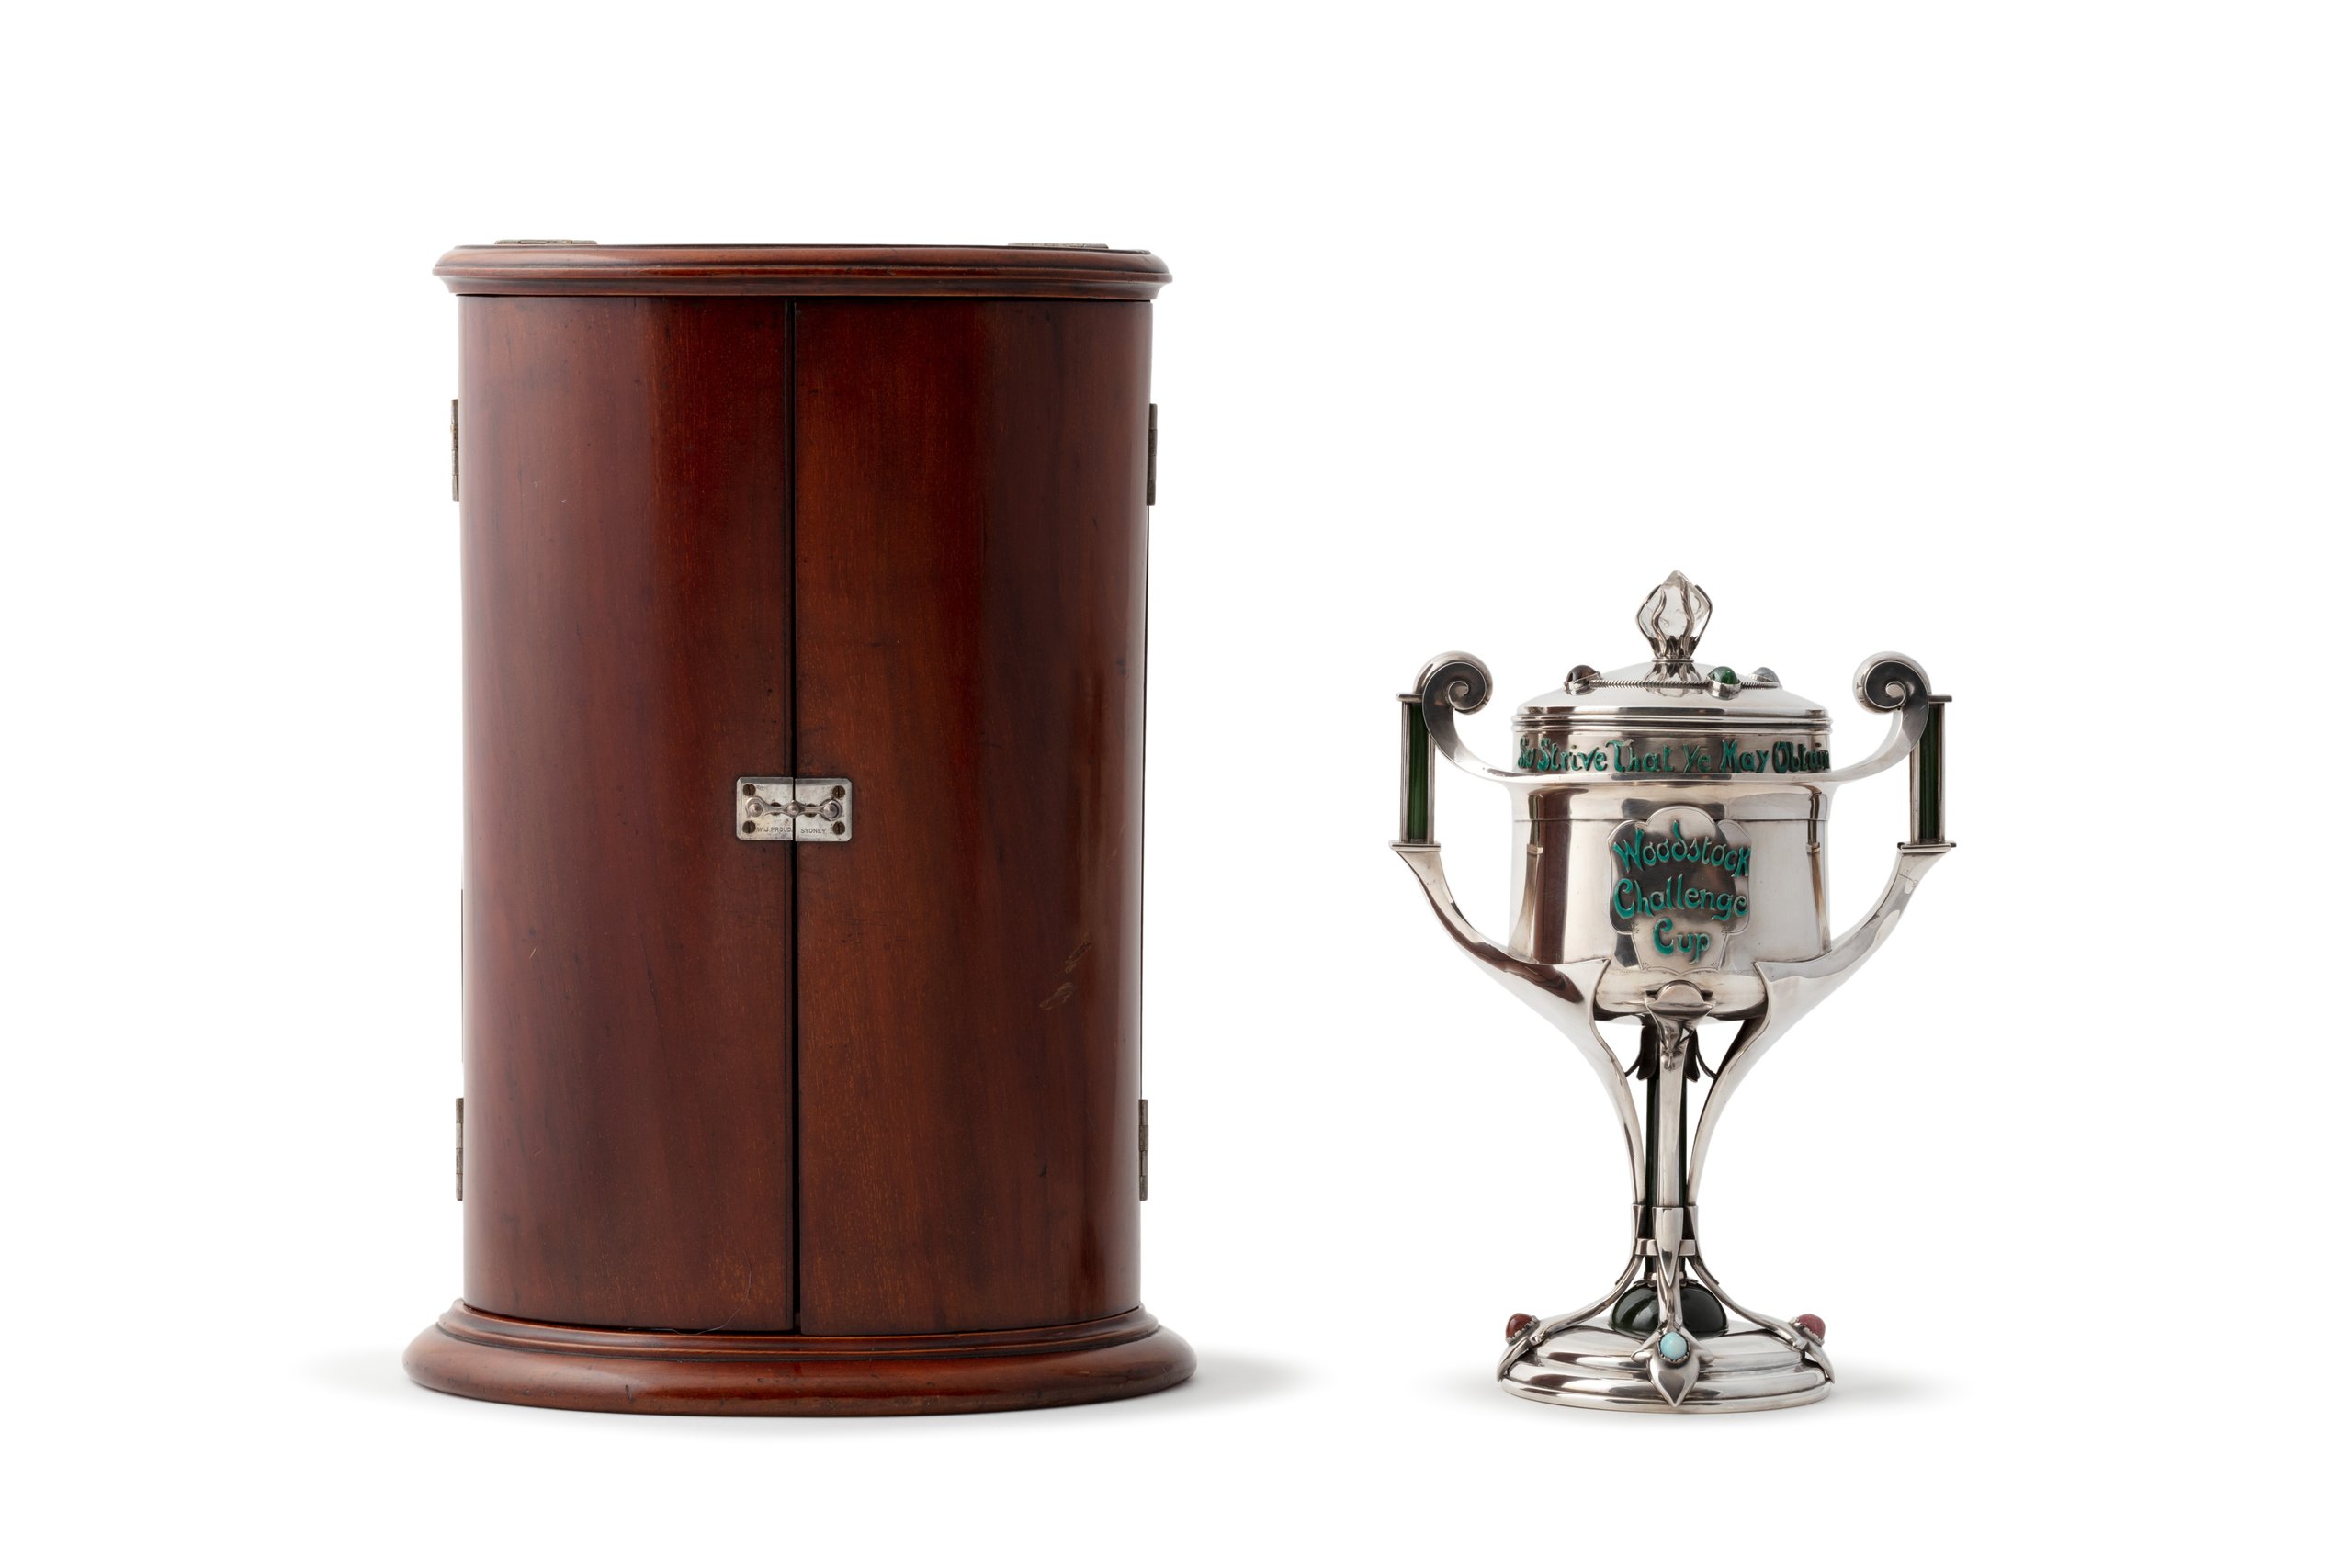 'Woodstock Challenge Cup' by Priora Brothers, Sydney